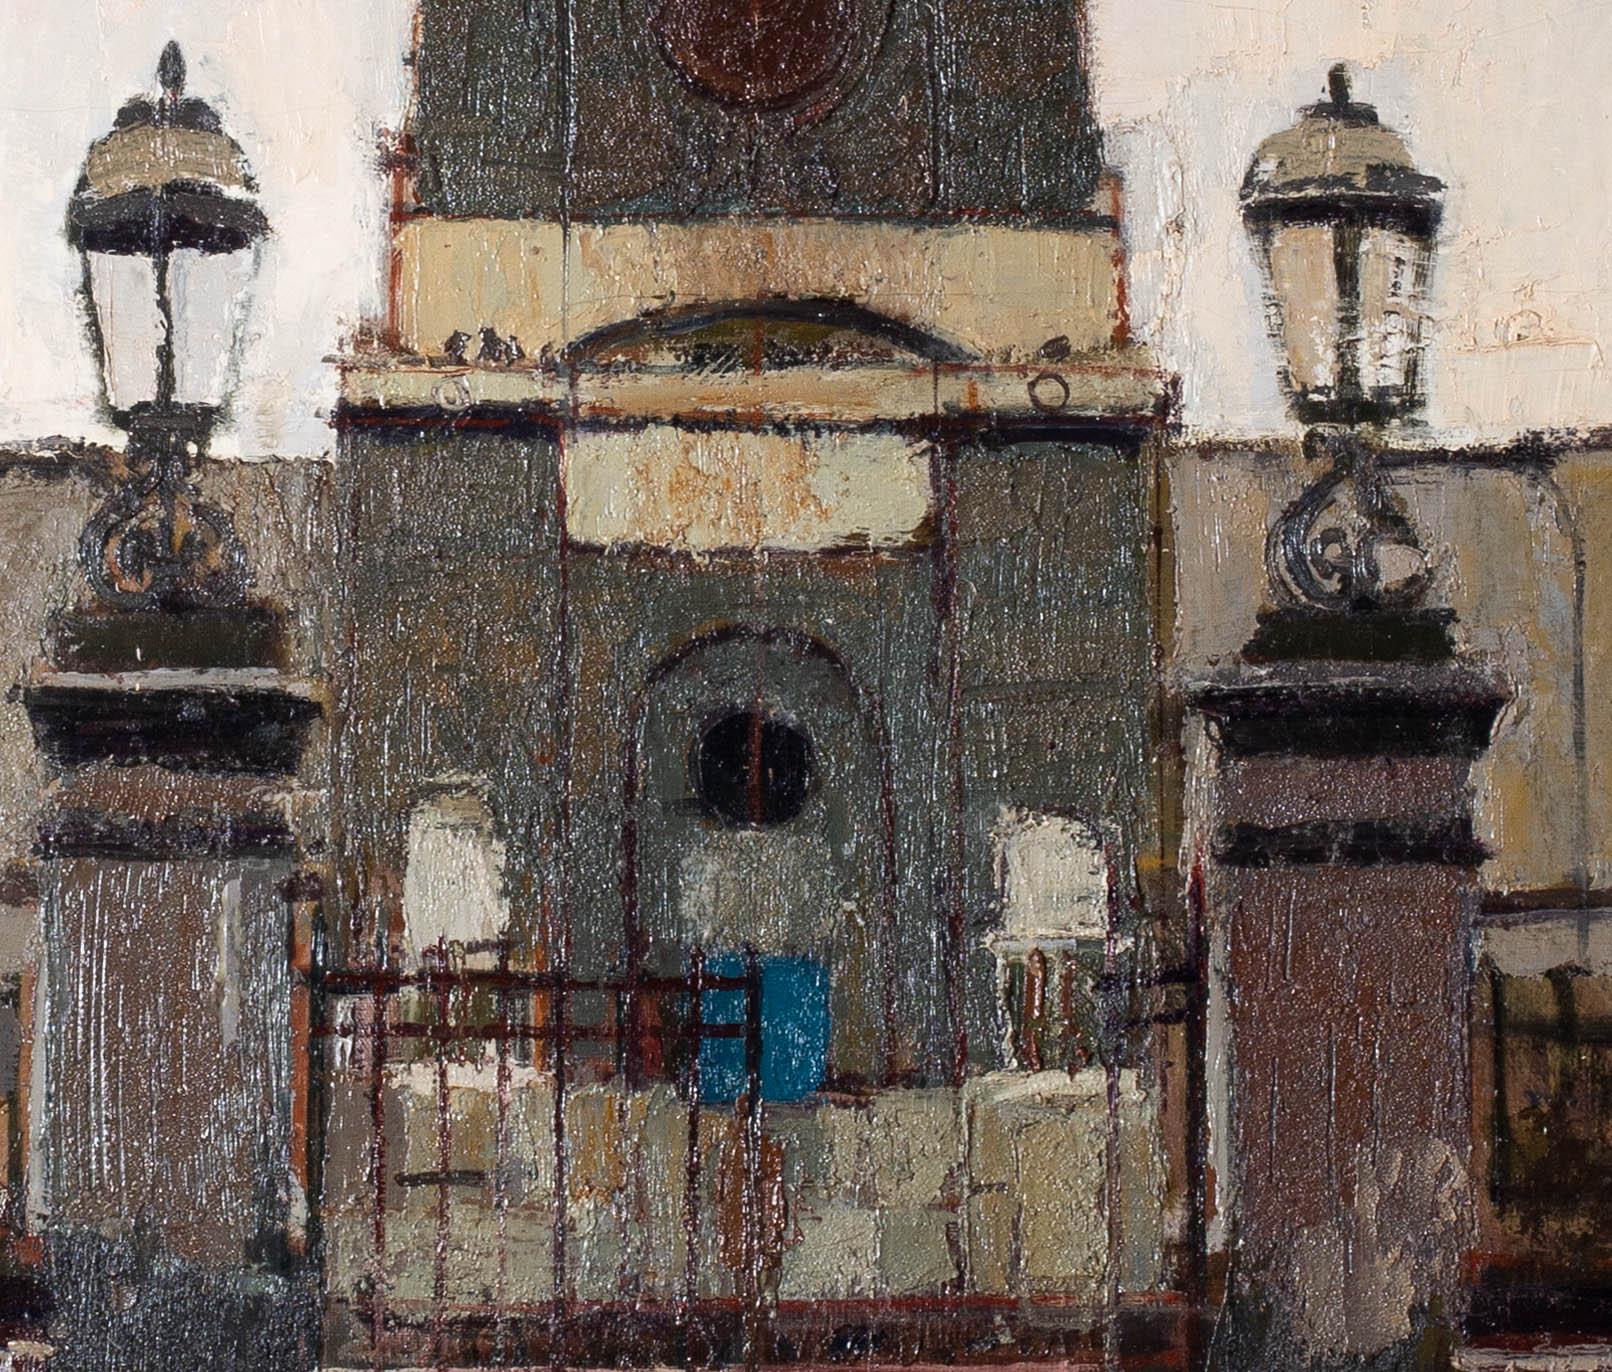 Ken Howard IBritish, born 1932)
‘St. Anne’s Church, Soho, London’
Oil on canvas, 
42 x 24 in. (106.7 x 61 cm.)
Signed  and inscribed on reverse of canvas under the reline (photo attached)
‘James K. Howard Rome & Abbey scholarships in painting 1958